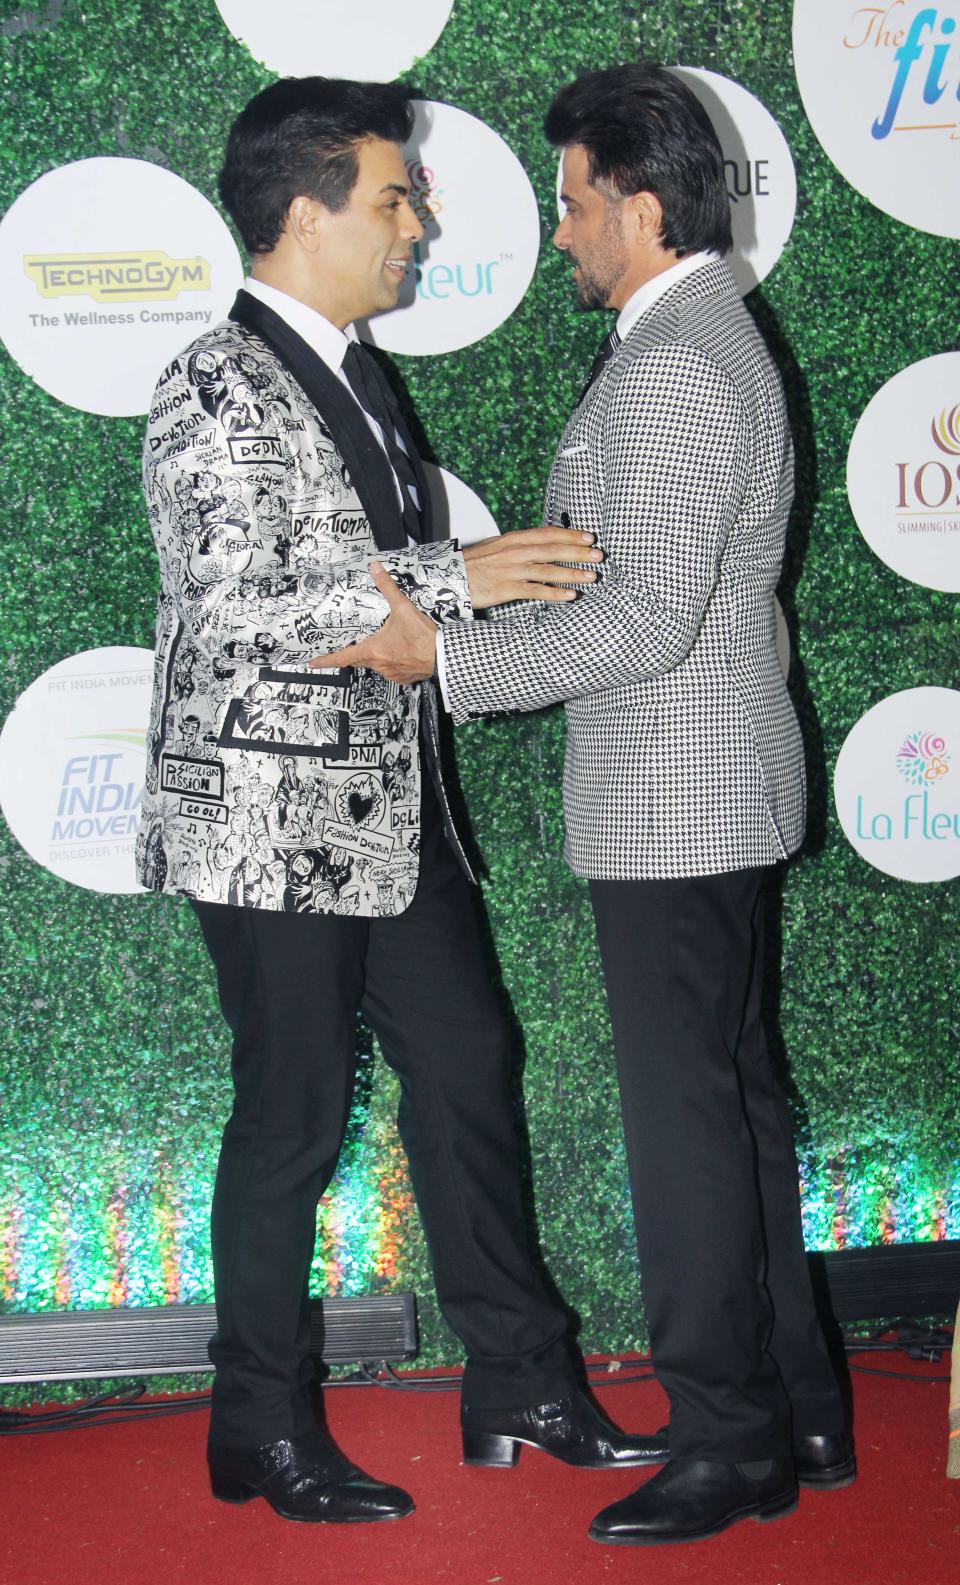 Karan Johar and Anil Kapoor engrossed in a conversation.